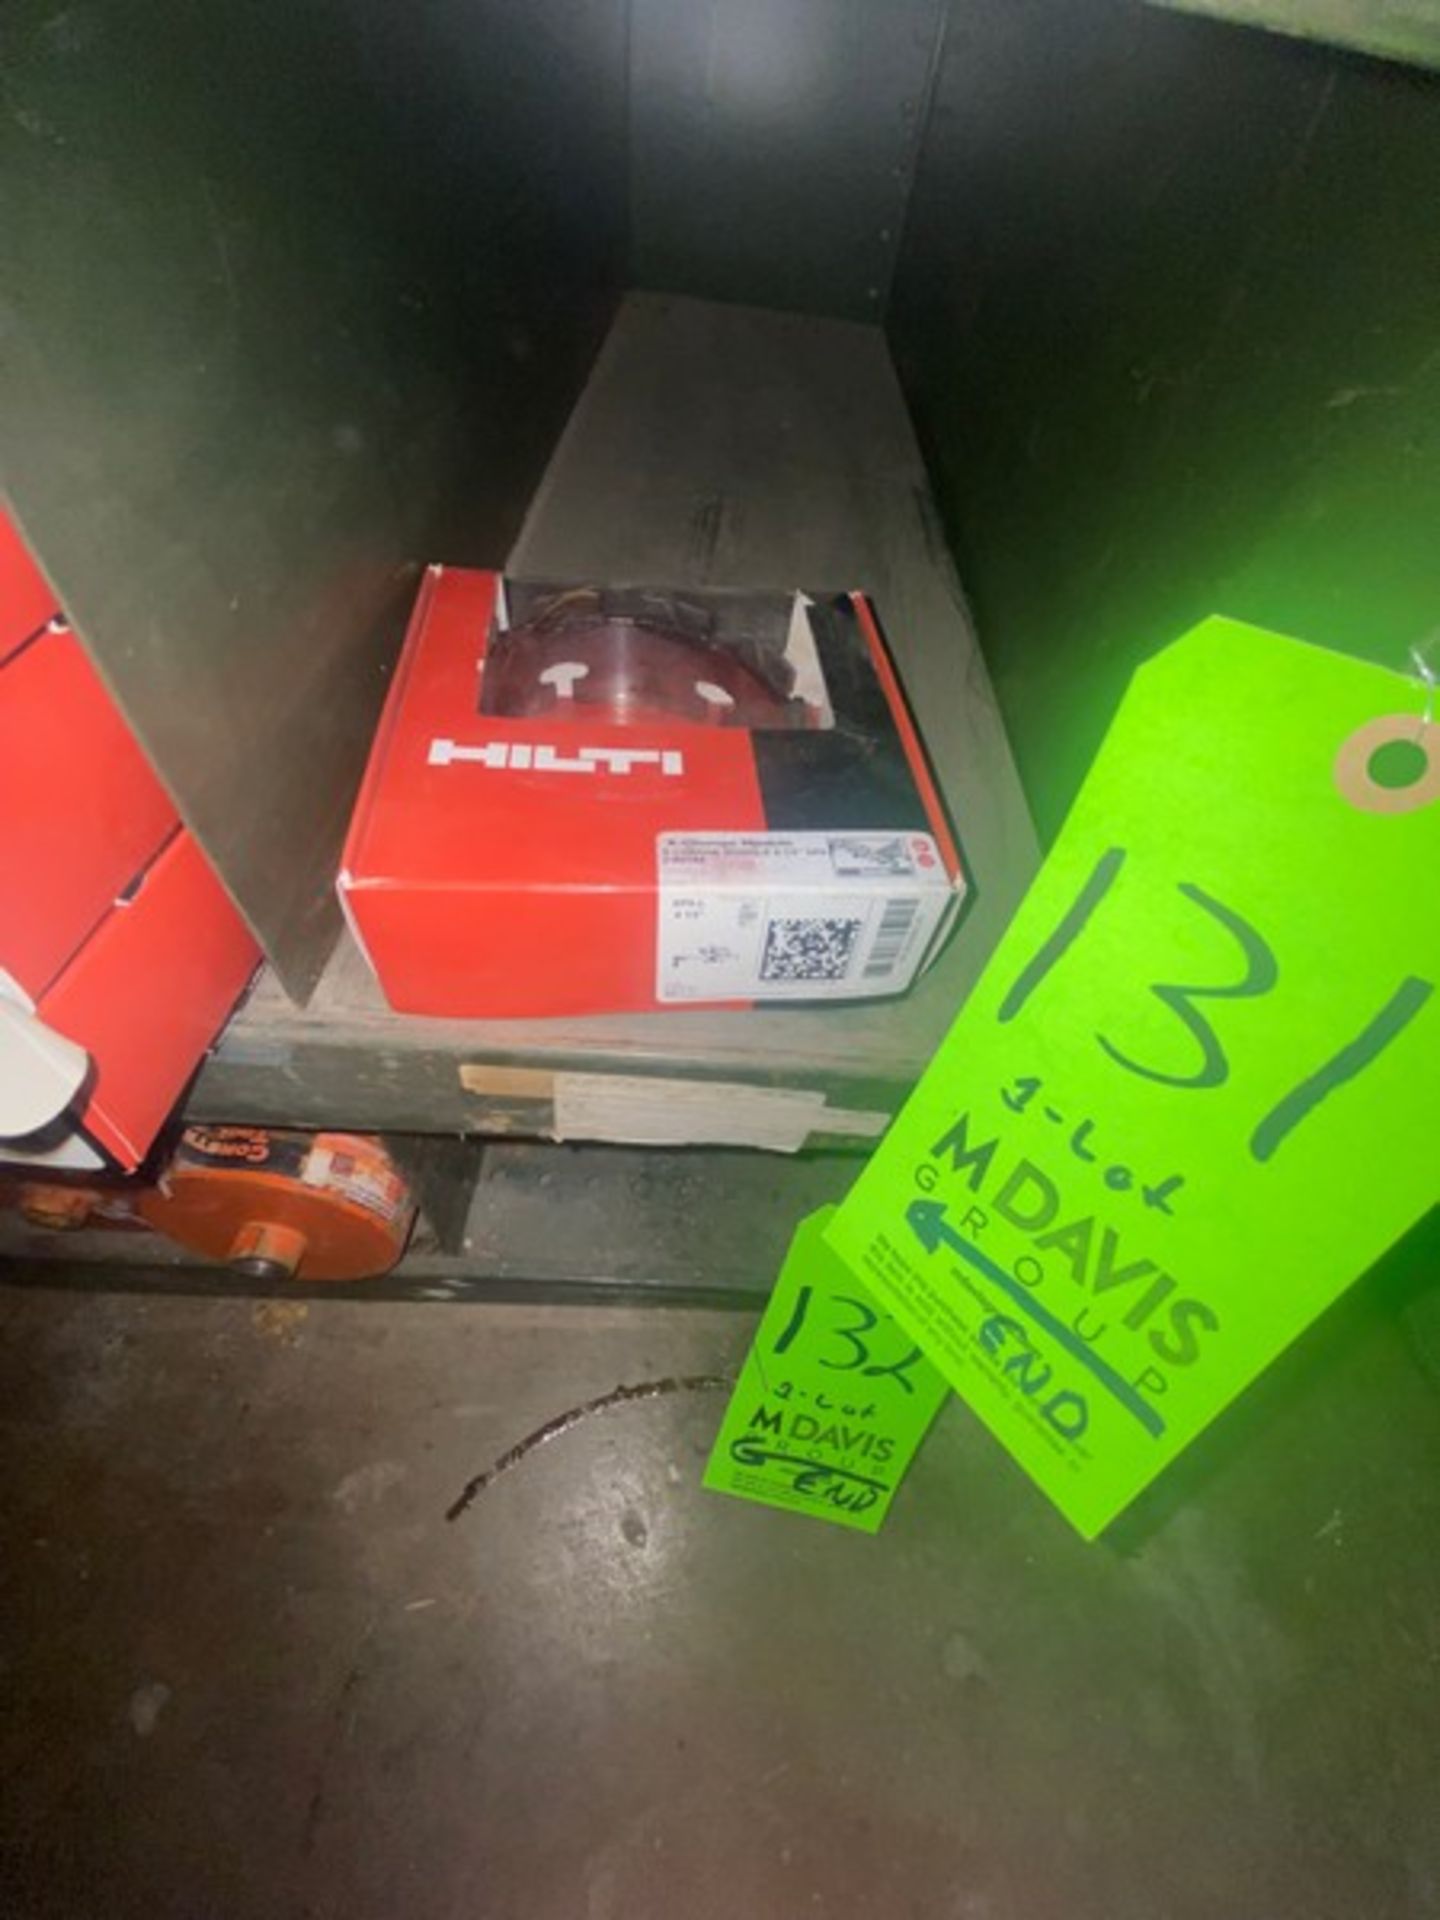 2-NEW Hilti X-Change 4-1/2" SPX Module & 3-Used (LOCATED IN MONROEVILLE, PA)